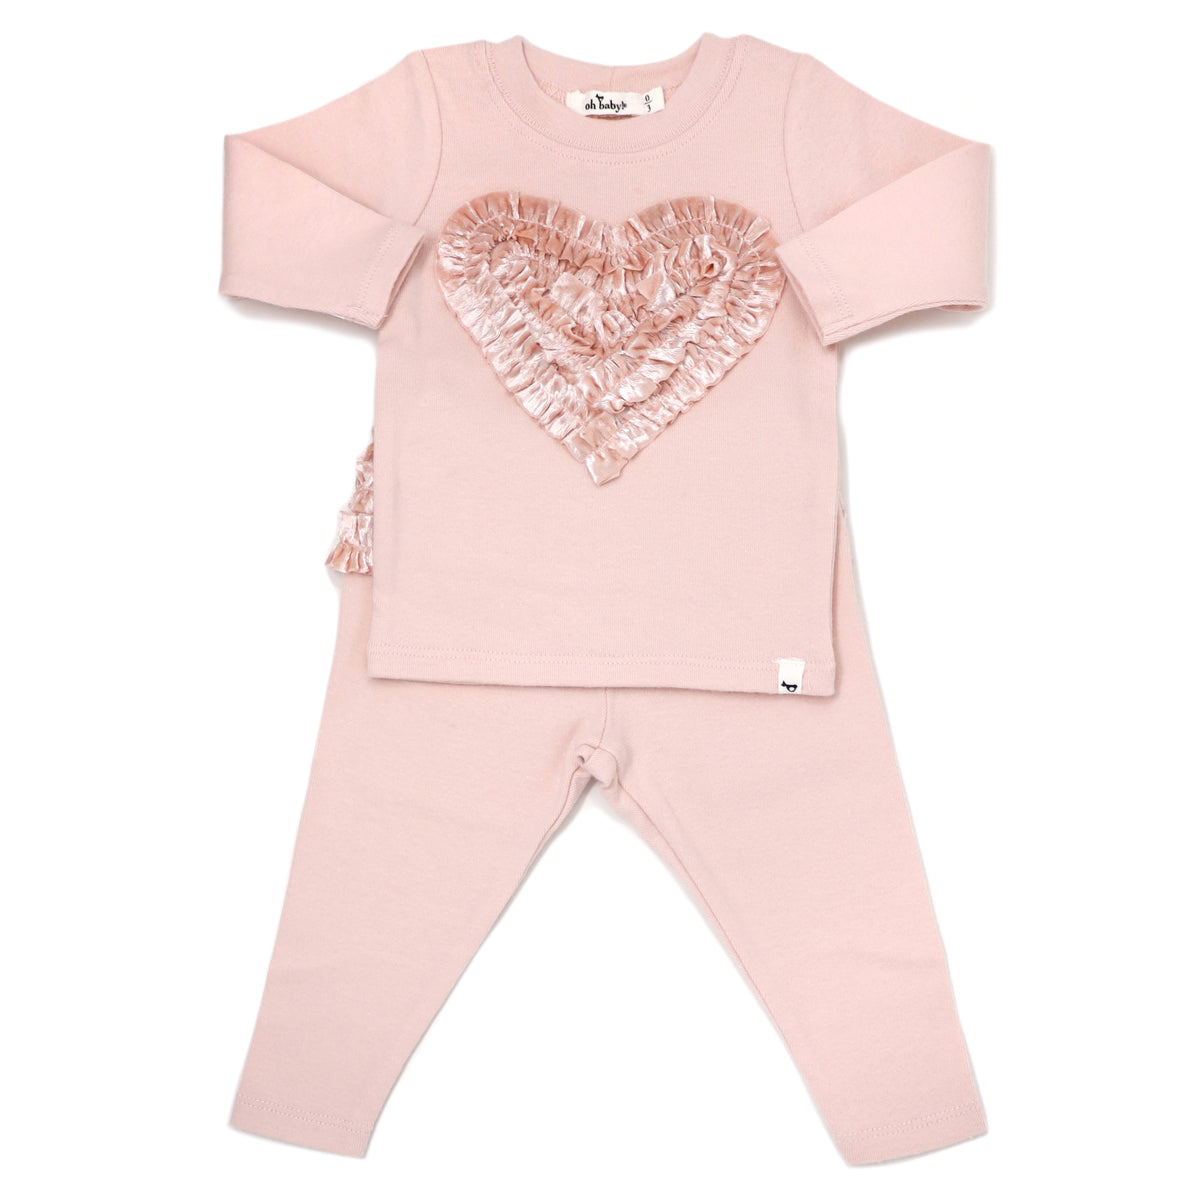 oh baby! Two Piece Set - Velvet Ruffle Heart Pink - Pale Pink